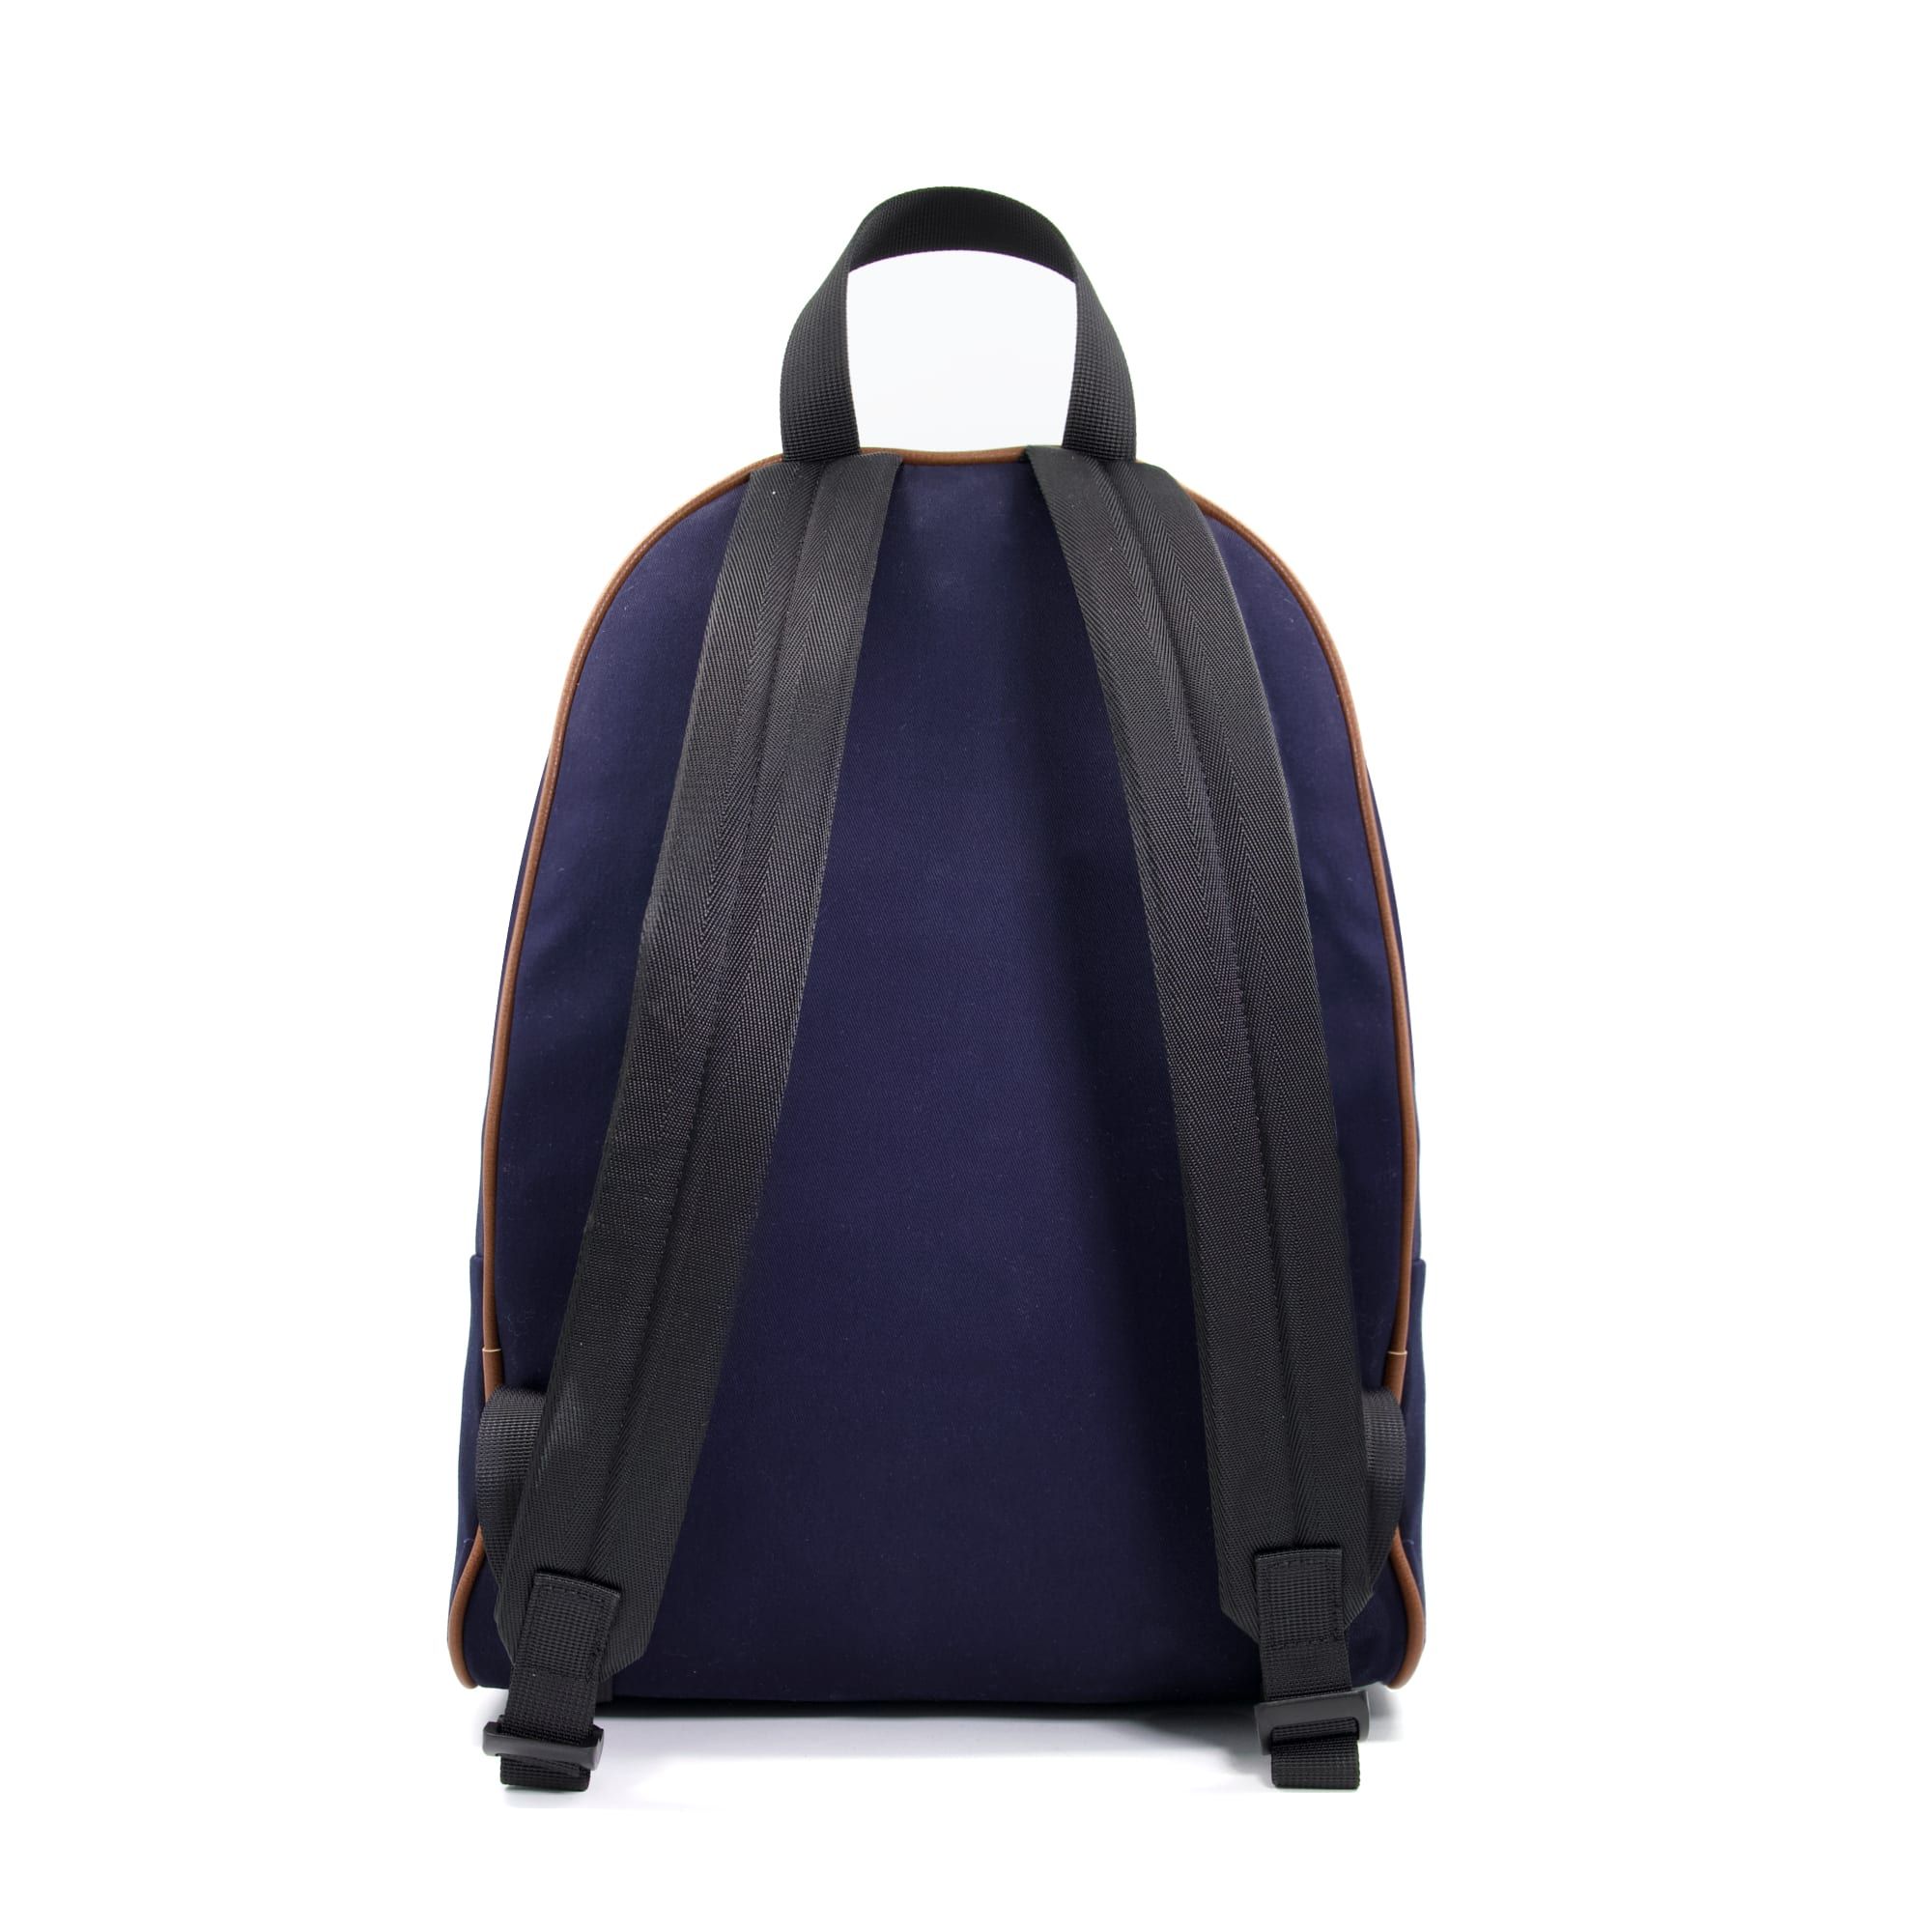 Office commutes and weekends away have never looked so stylish. This wonderfully lightweight backpack features adjustable straps, three zip compartments and a neutral, wear-with-everything colour palette.